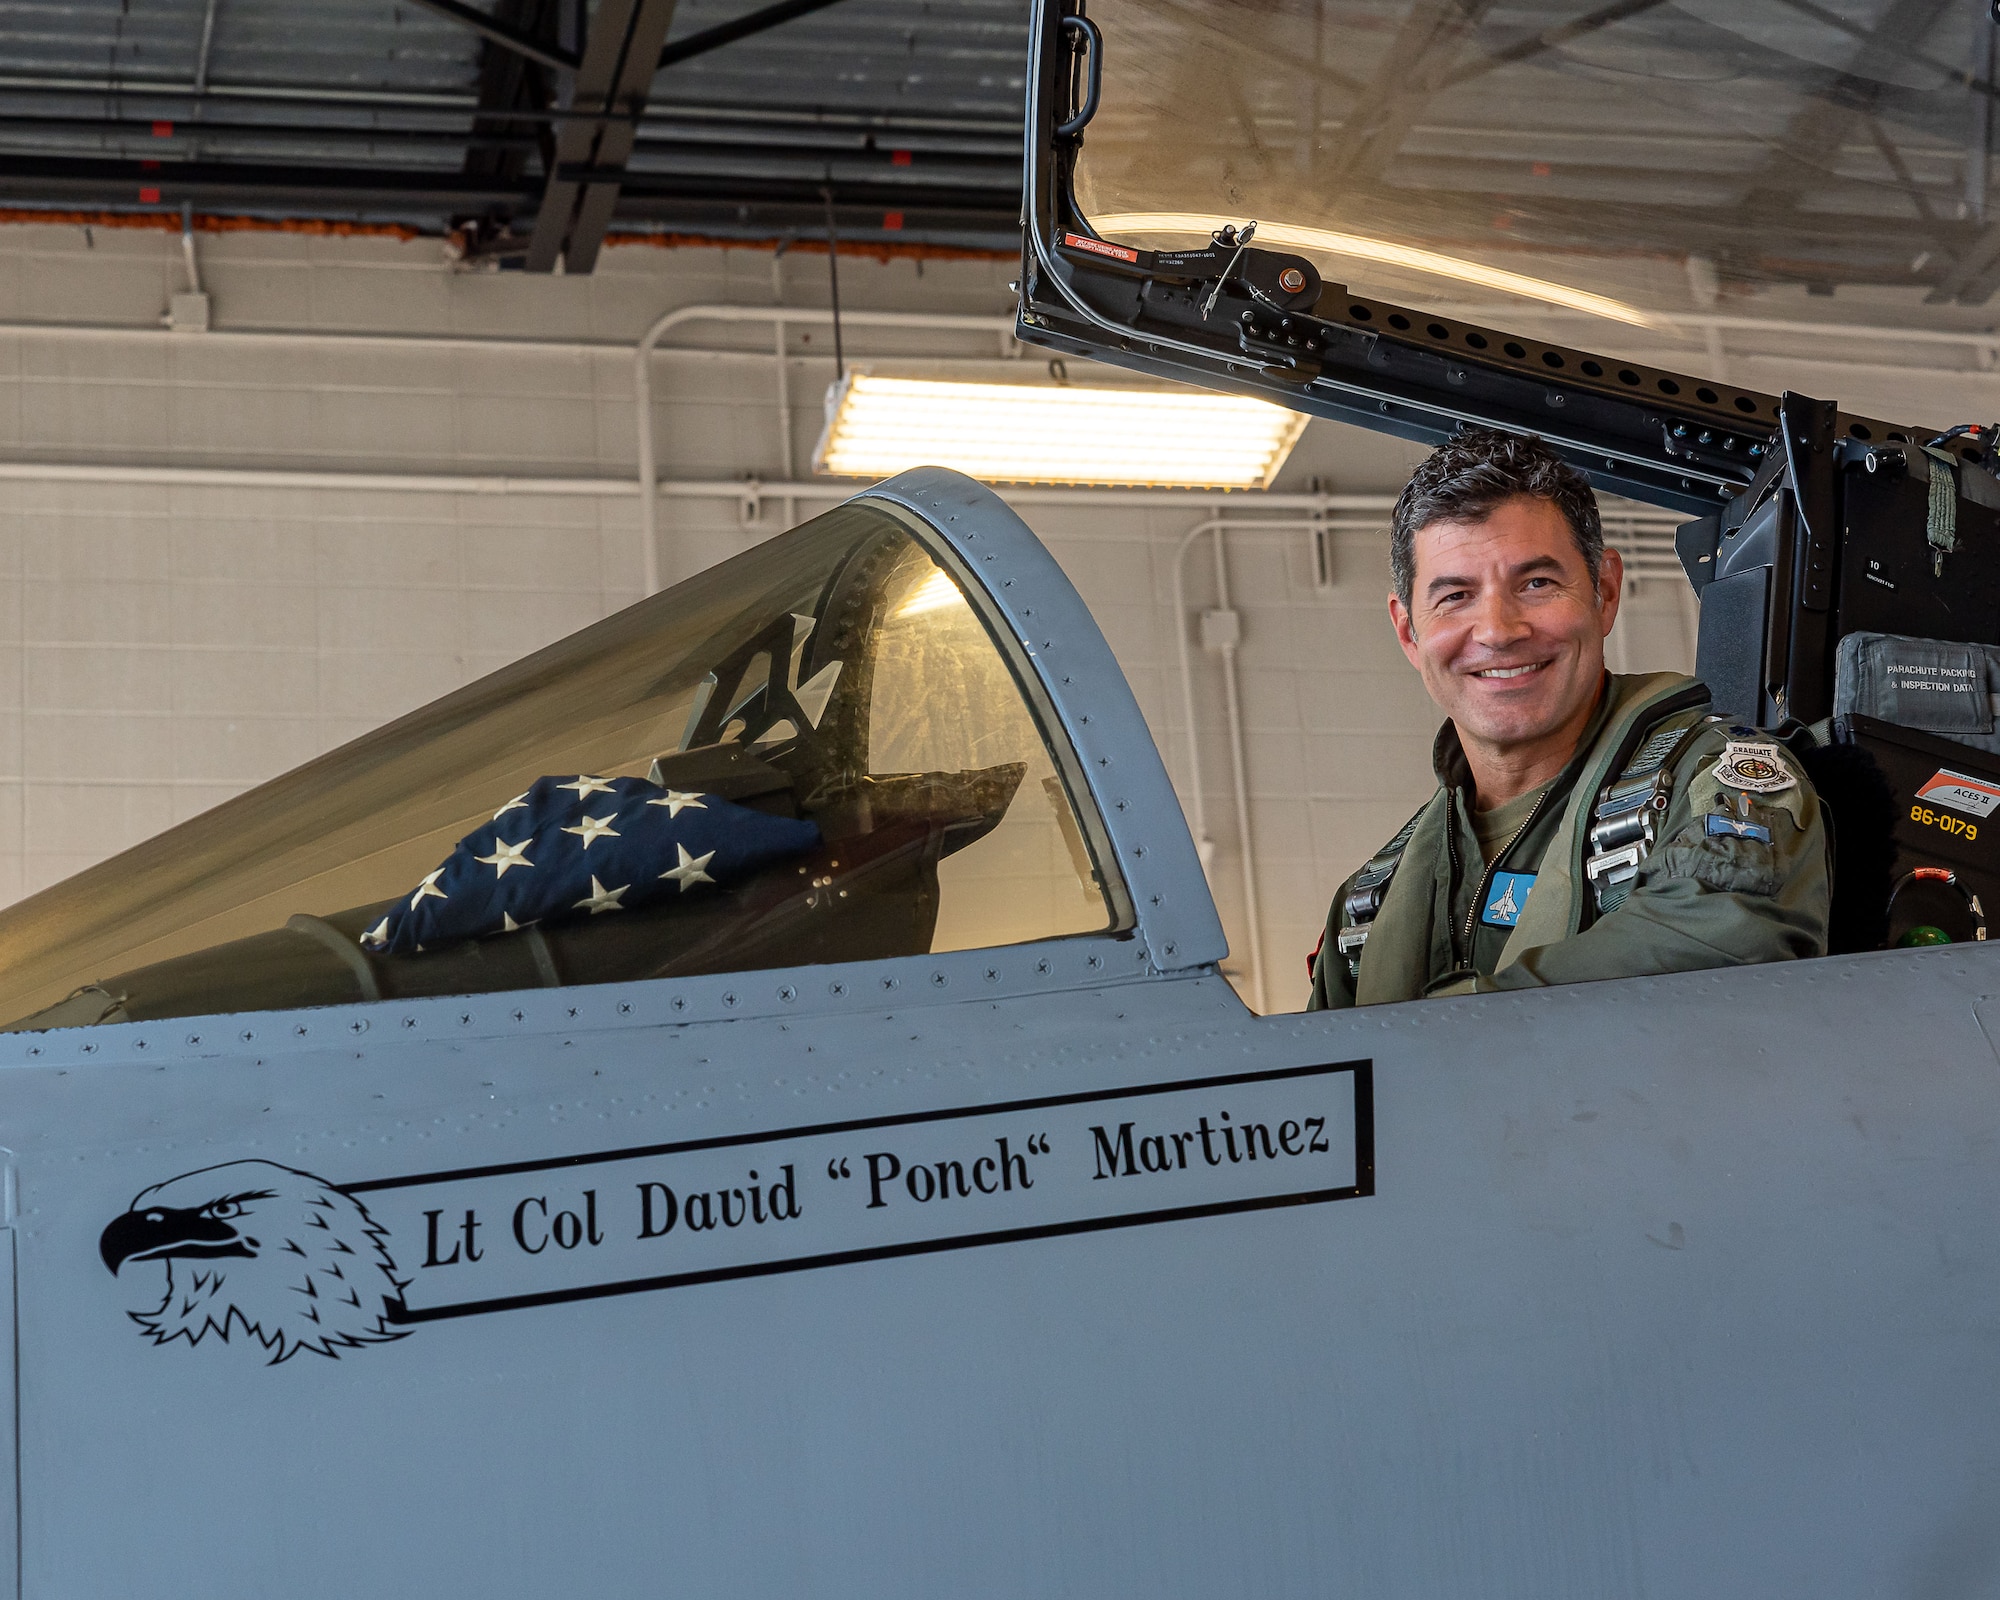 Lt. Col. David Martinez, Detachment 1, 125th Fighter Wing Operations Officer, flies his “Fini Flight” in an F-15C fighter aircraft at Homestead Air Reserve Base, Fla., on Nov. 5, 2021. Family, friends and unit members were on hand to celebrate Martinez's retirement from the Florida Air National Guard. (U.S. Air Force photo by Master Sgt. Mike Monlezun)